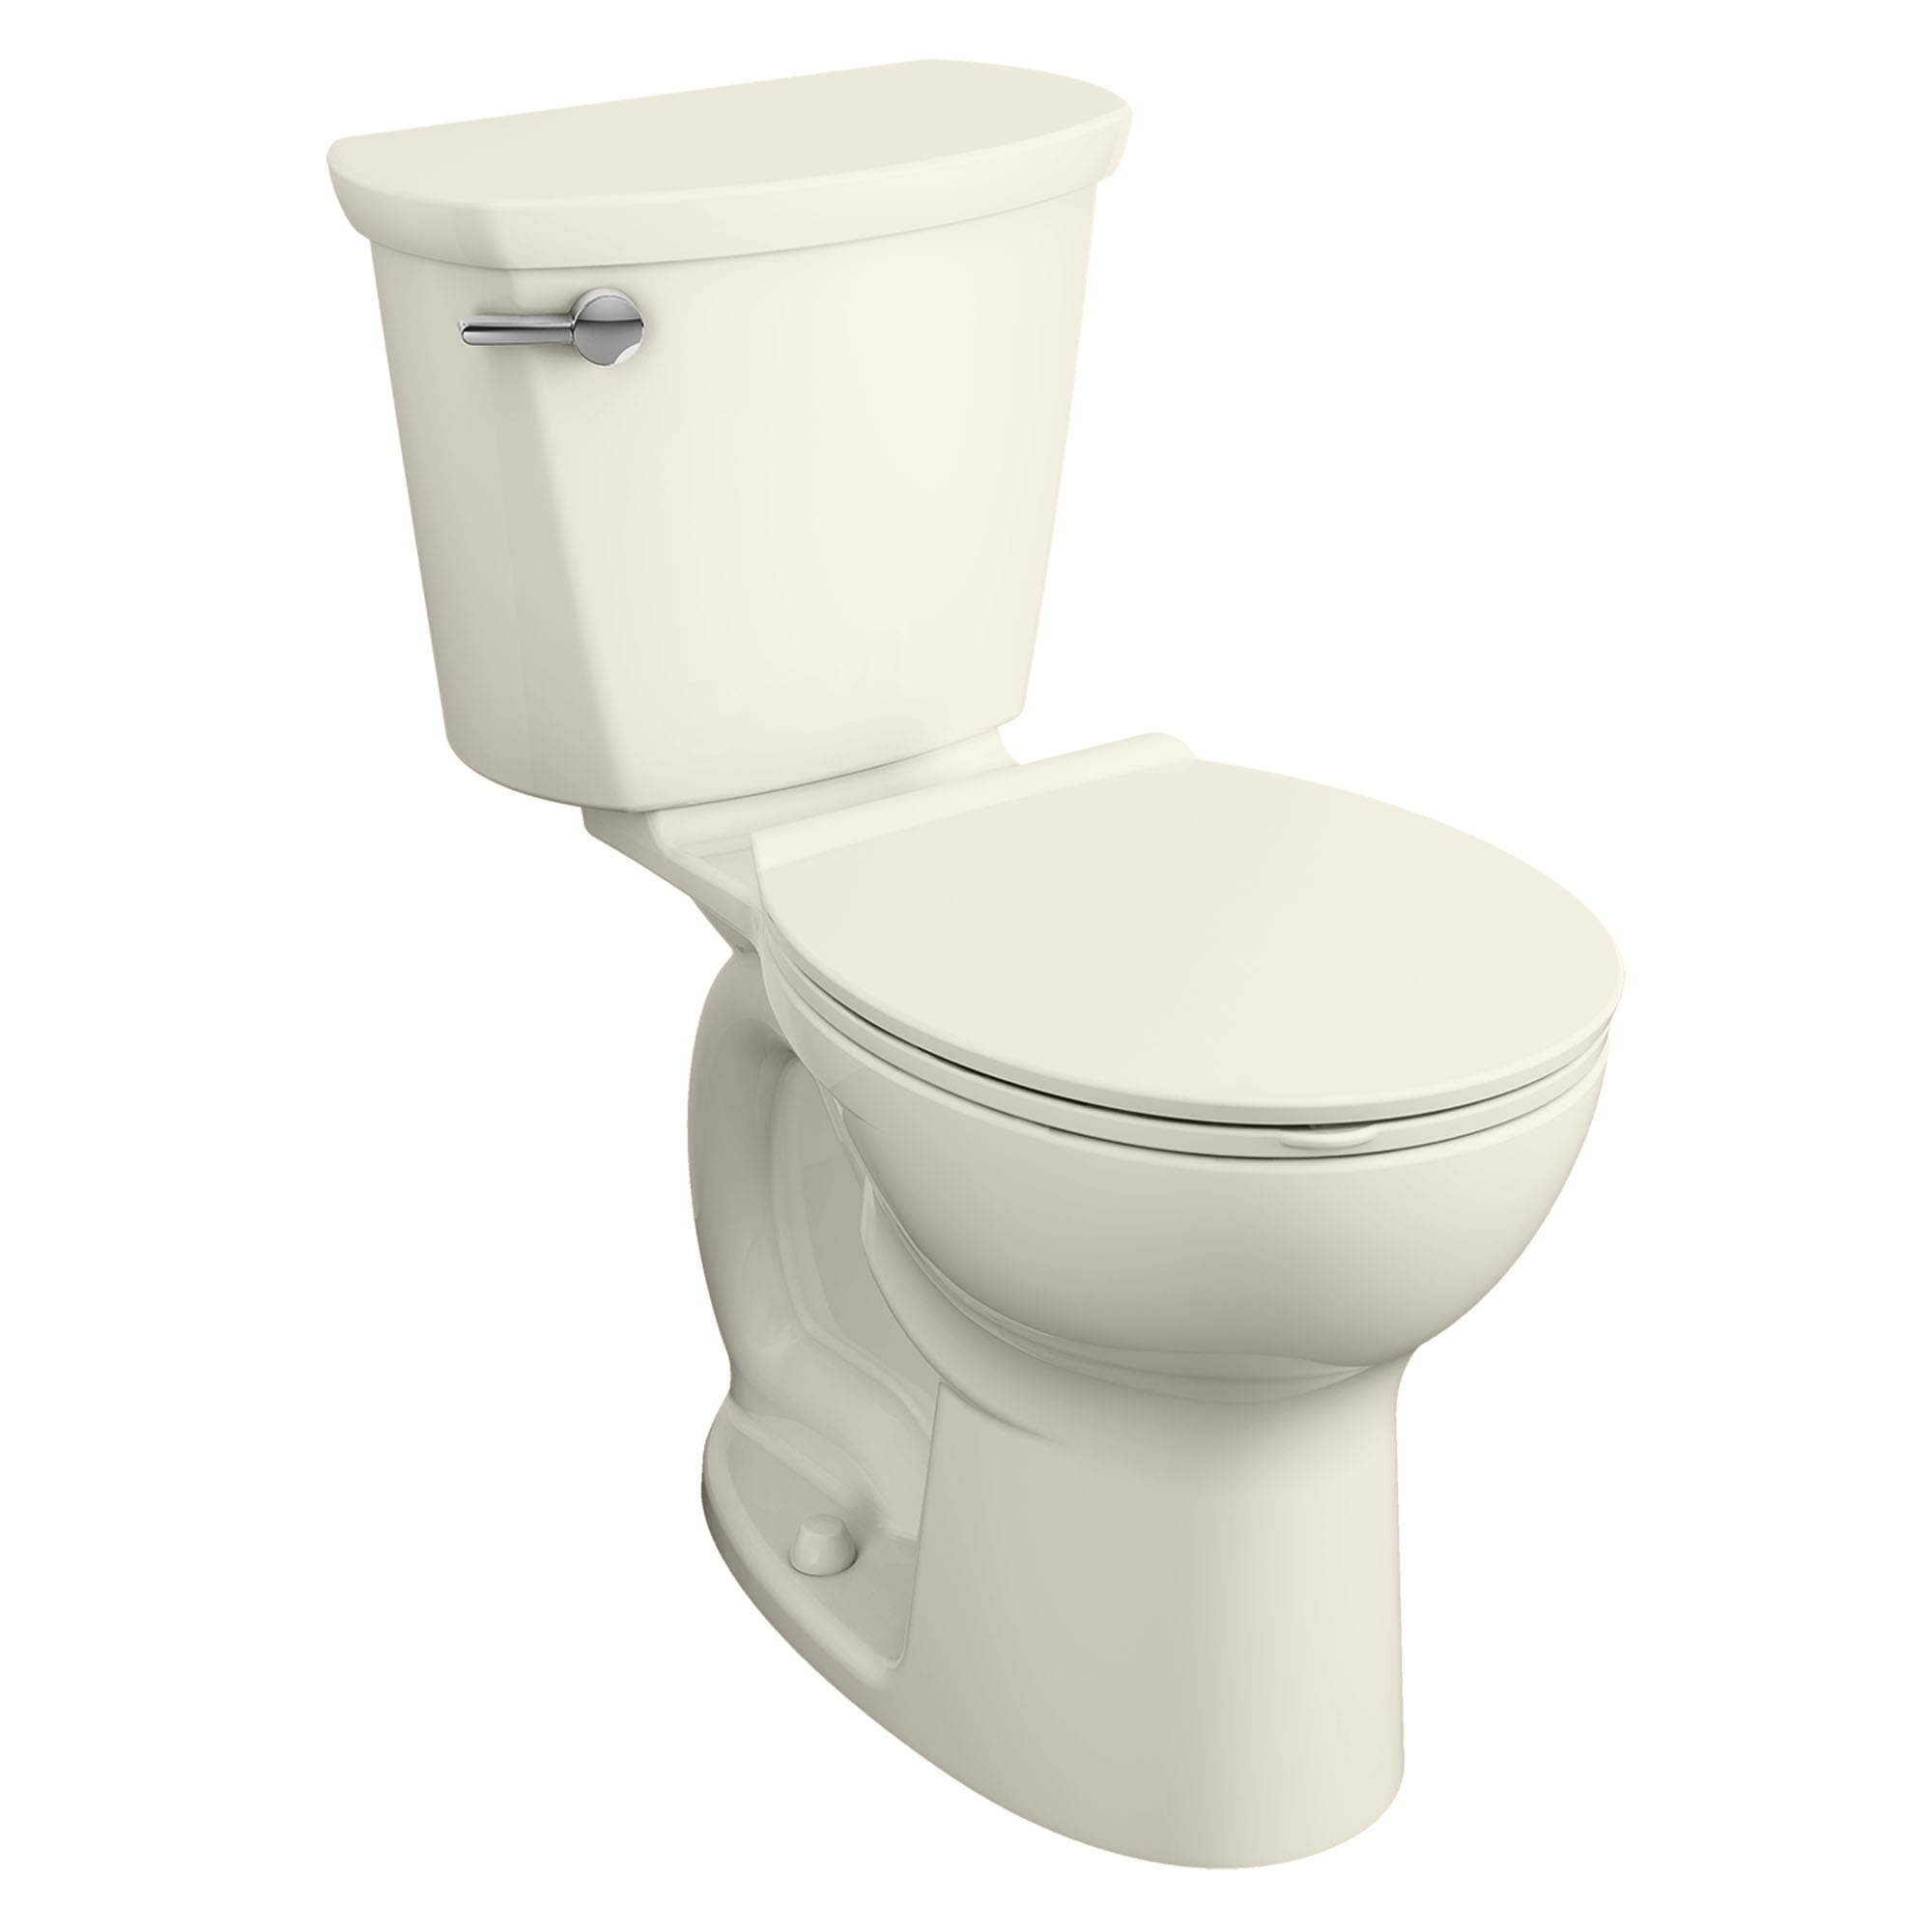 Cadet® PRO Two-Piece 1.6 gpf/6.0 Lpf Chair Height Round Front Toilet Less Seat